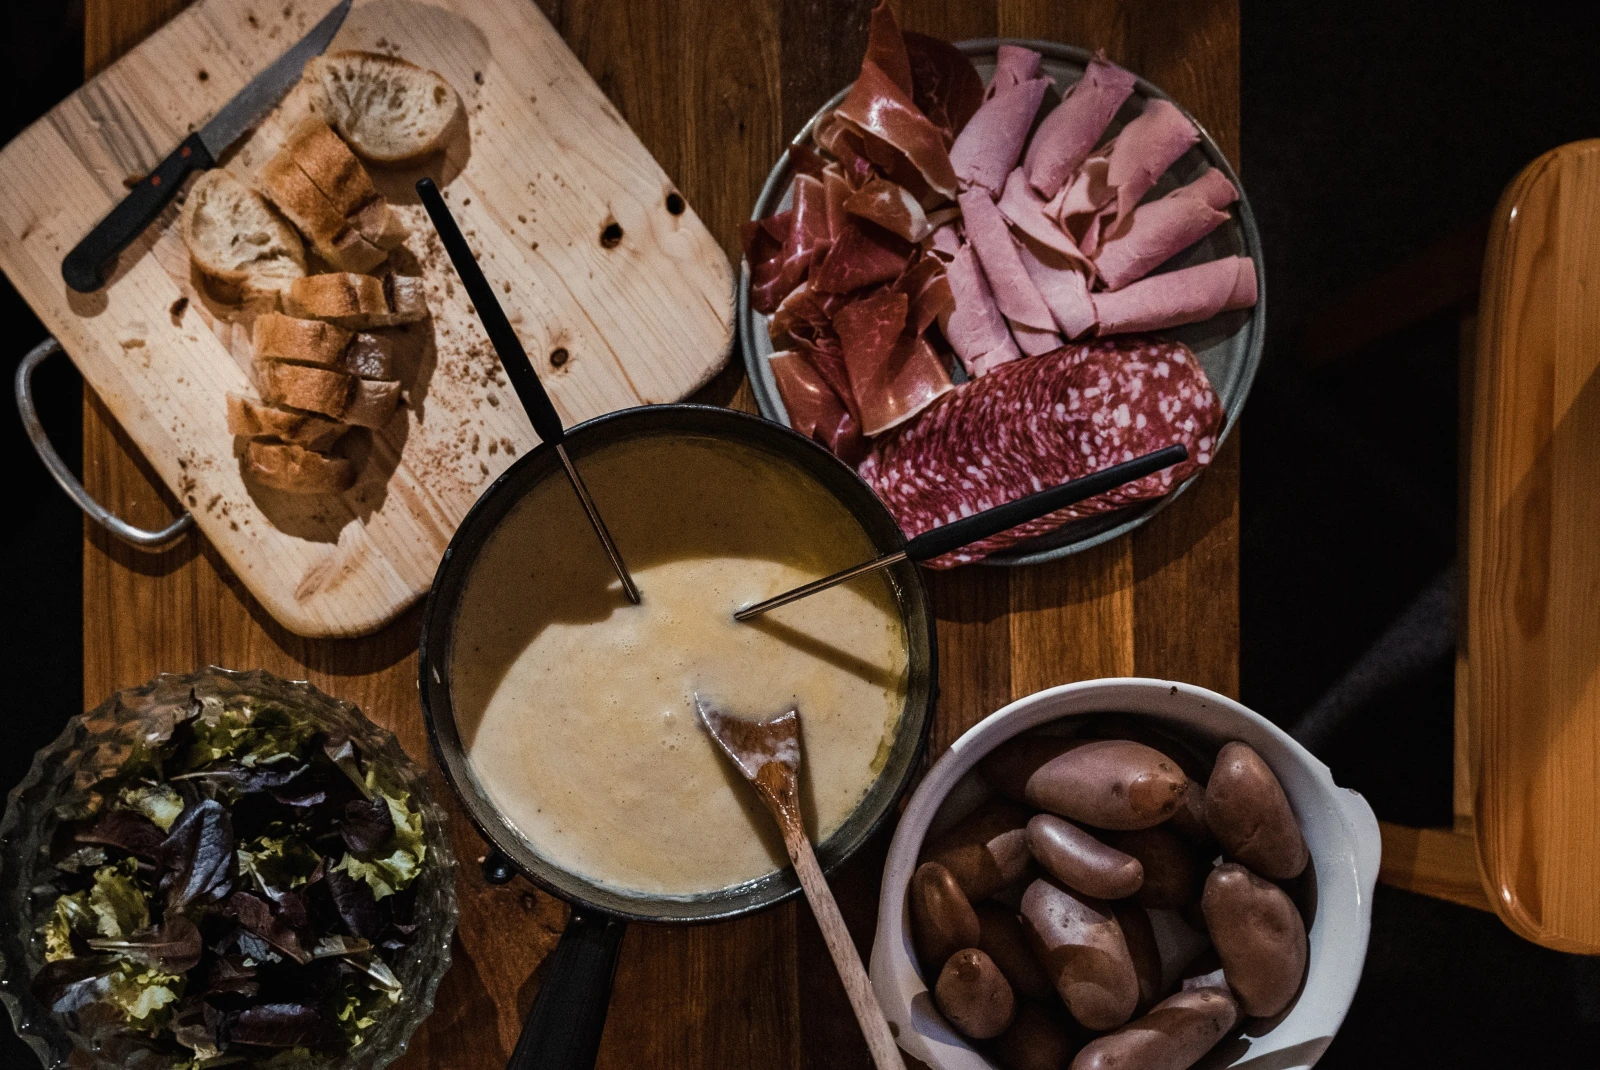 Boiling pot of Switzerland with charcuterie, vegetables, potatoes and bread on the side on wooden table.